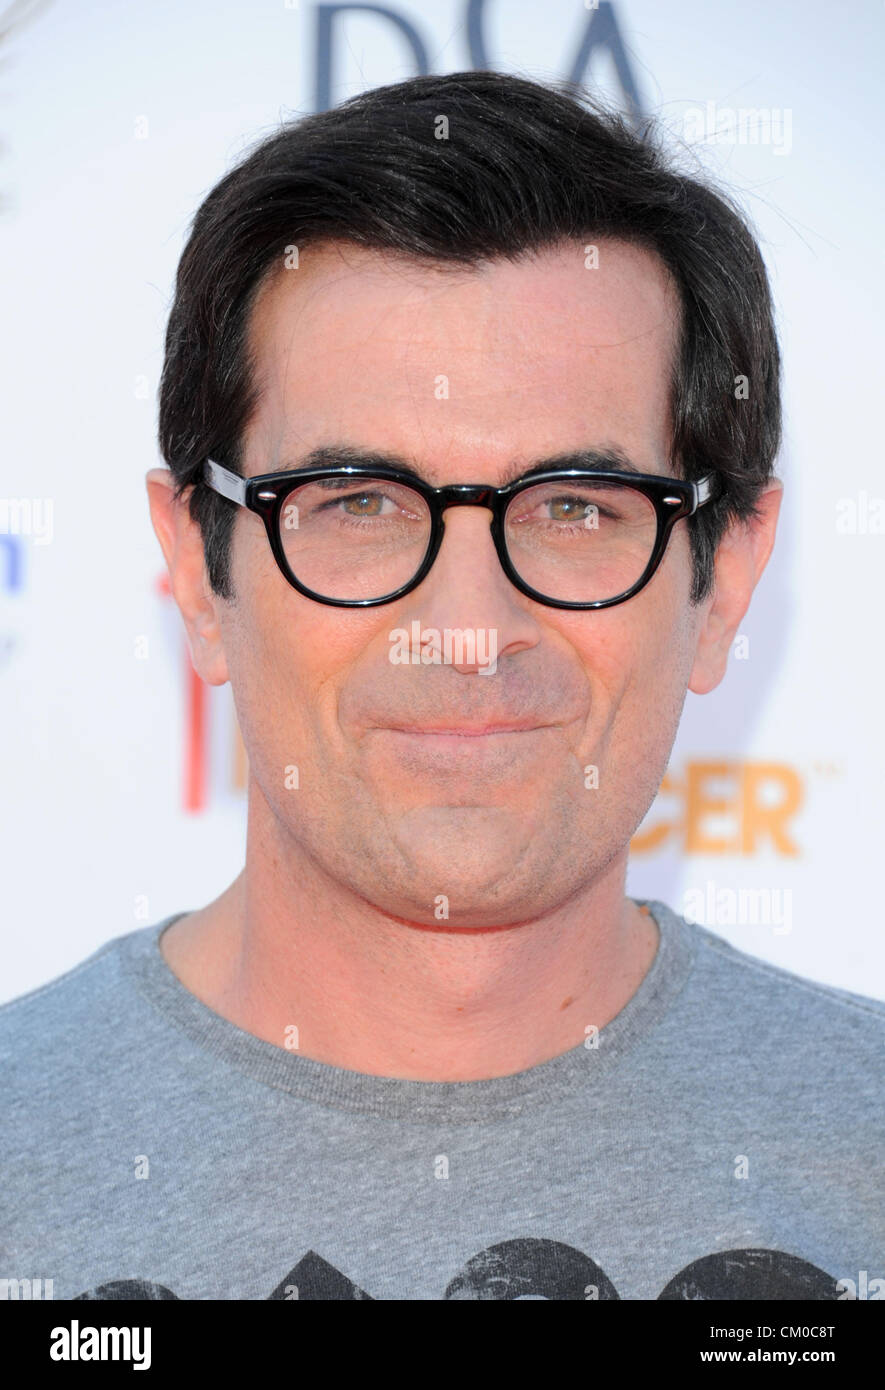 Los Angeles, Californie, au Royaume-Uni. 7 septembre 2012. Ty Burrell. "Stand up to Cancer". Credit : Sydney Alford / Alamy Live News Banque D'Images